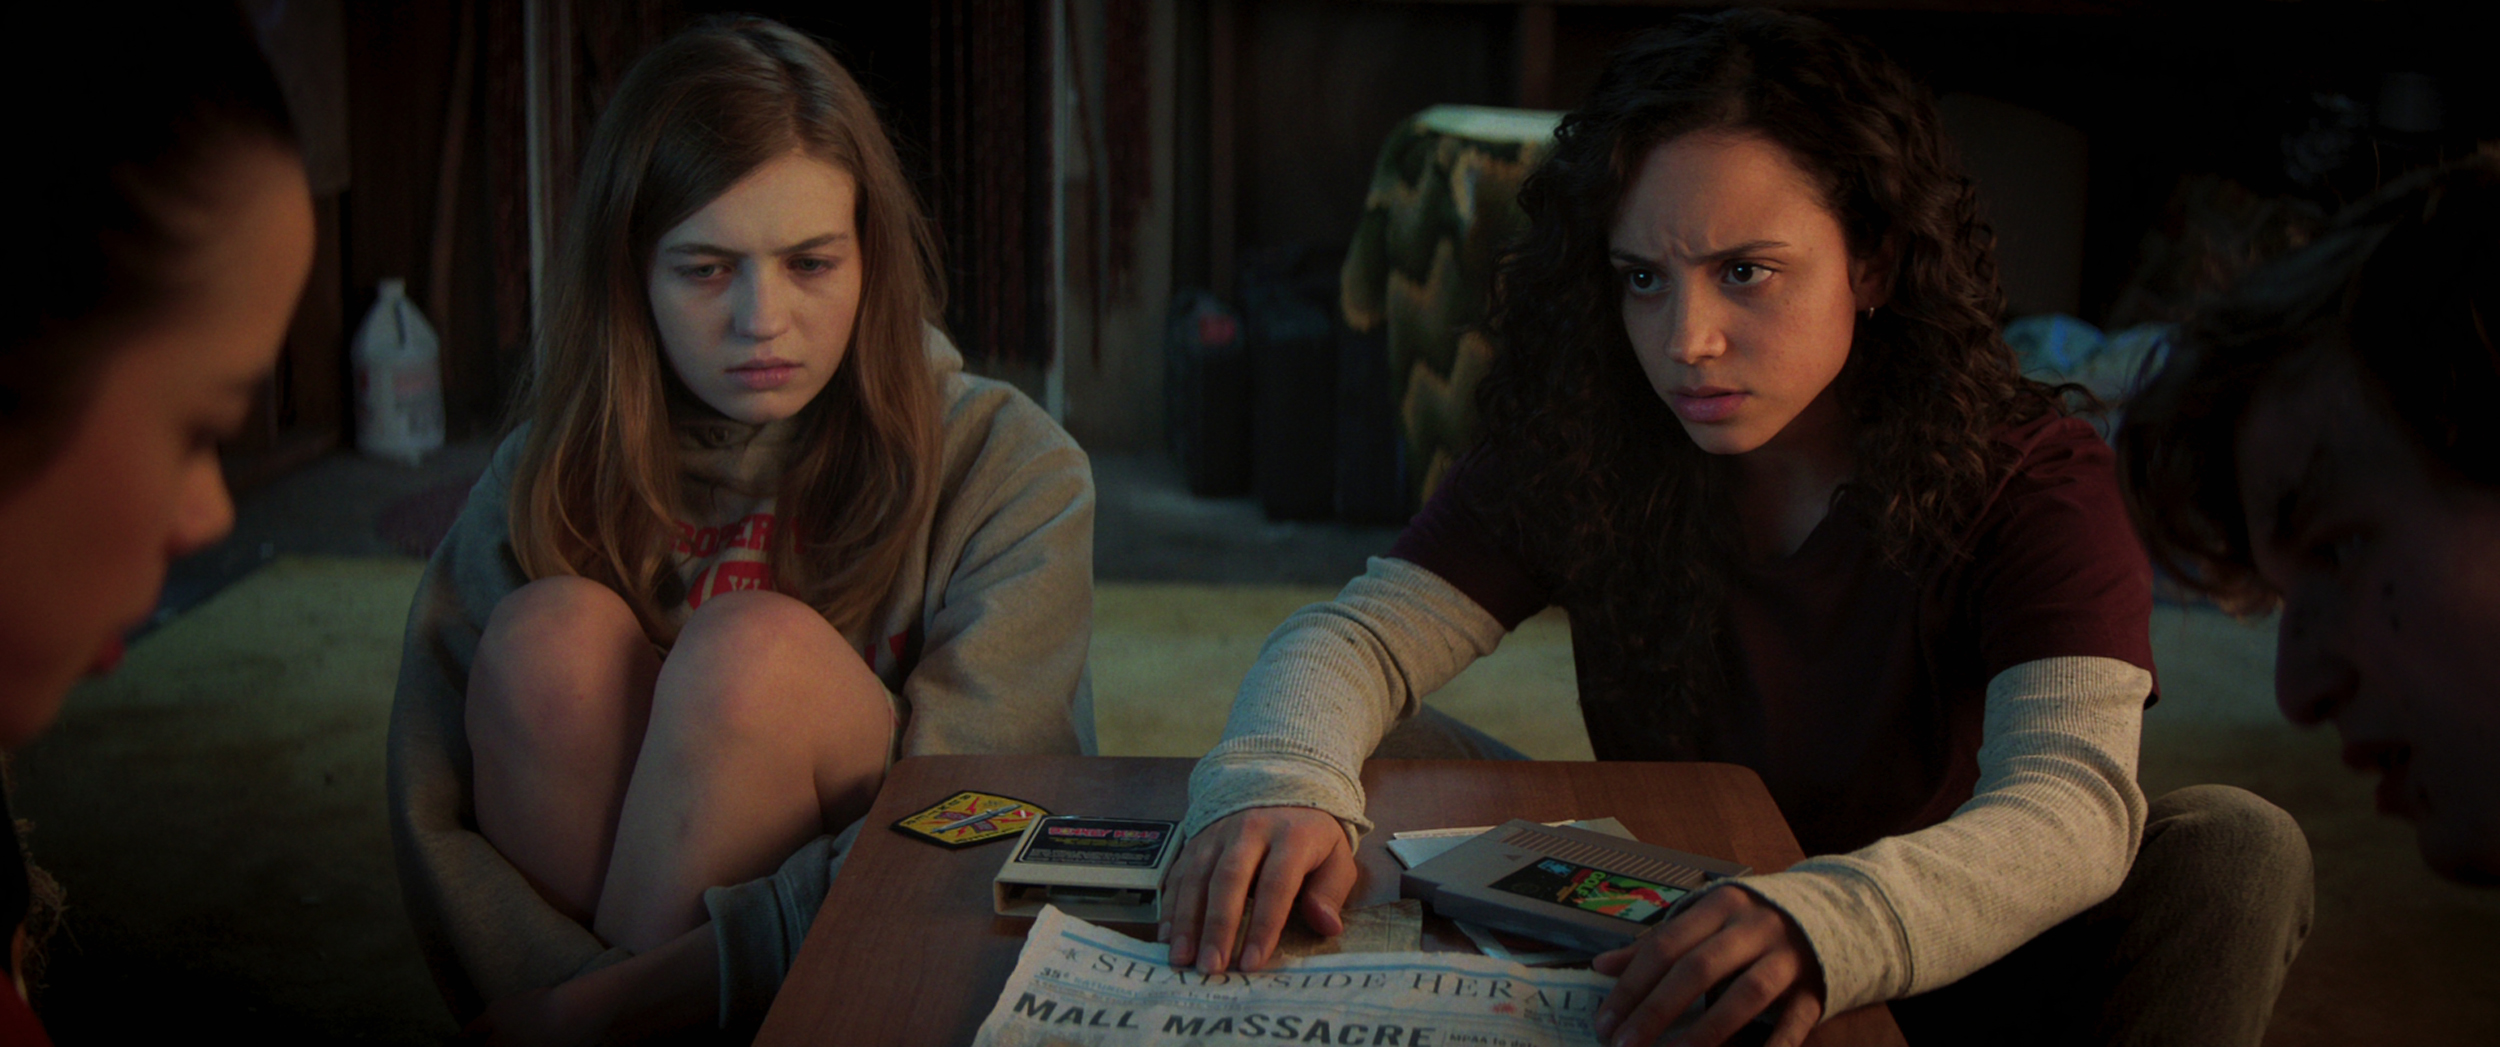 'Fear Street' stars Olivia Scott Welch and Kiana Madeira looking at a newspaper in Part 1 of the Netflix series